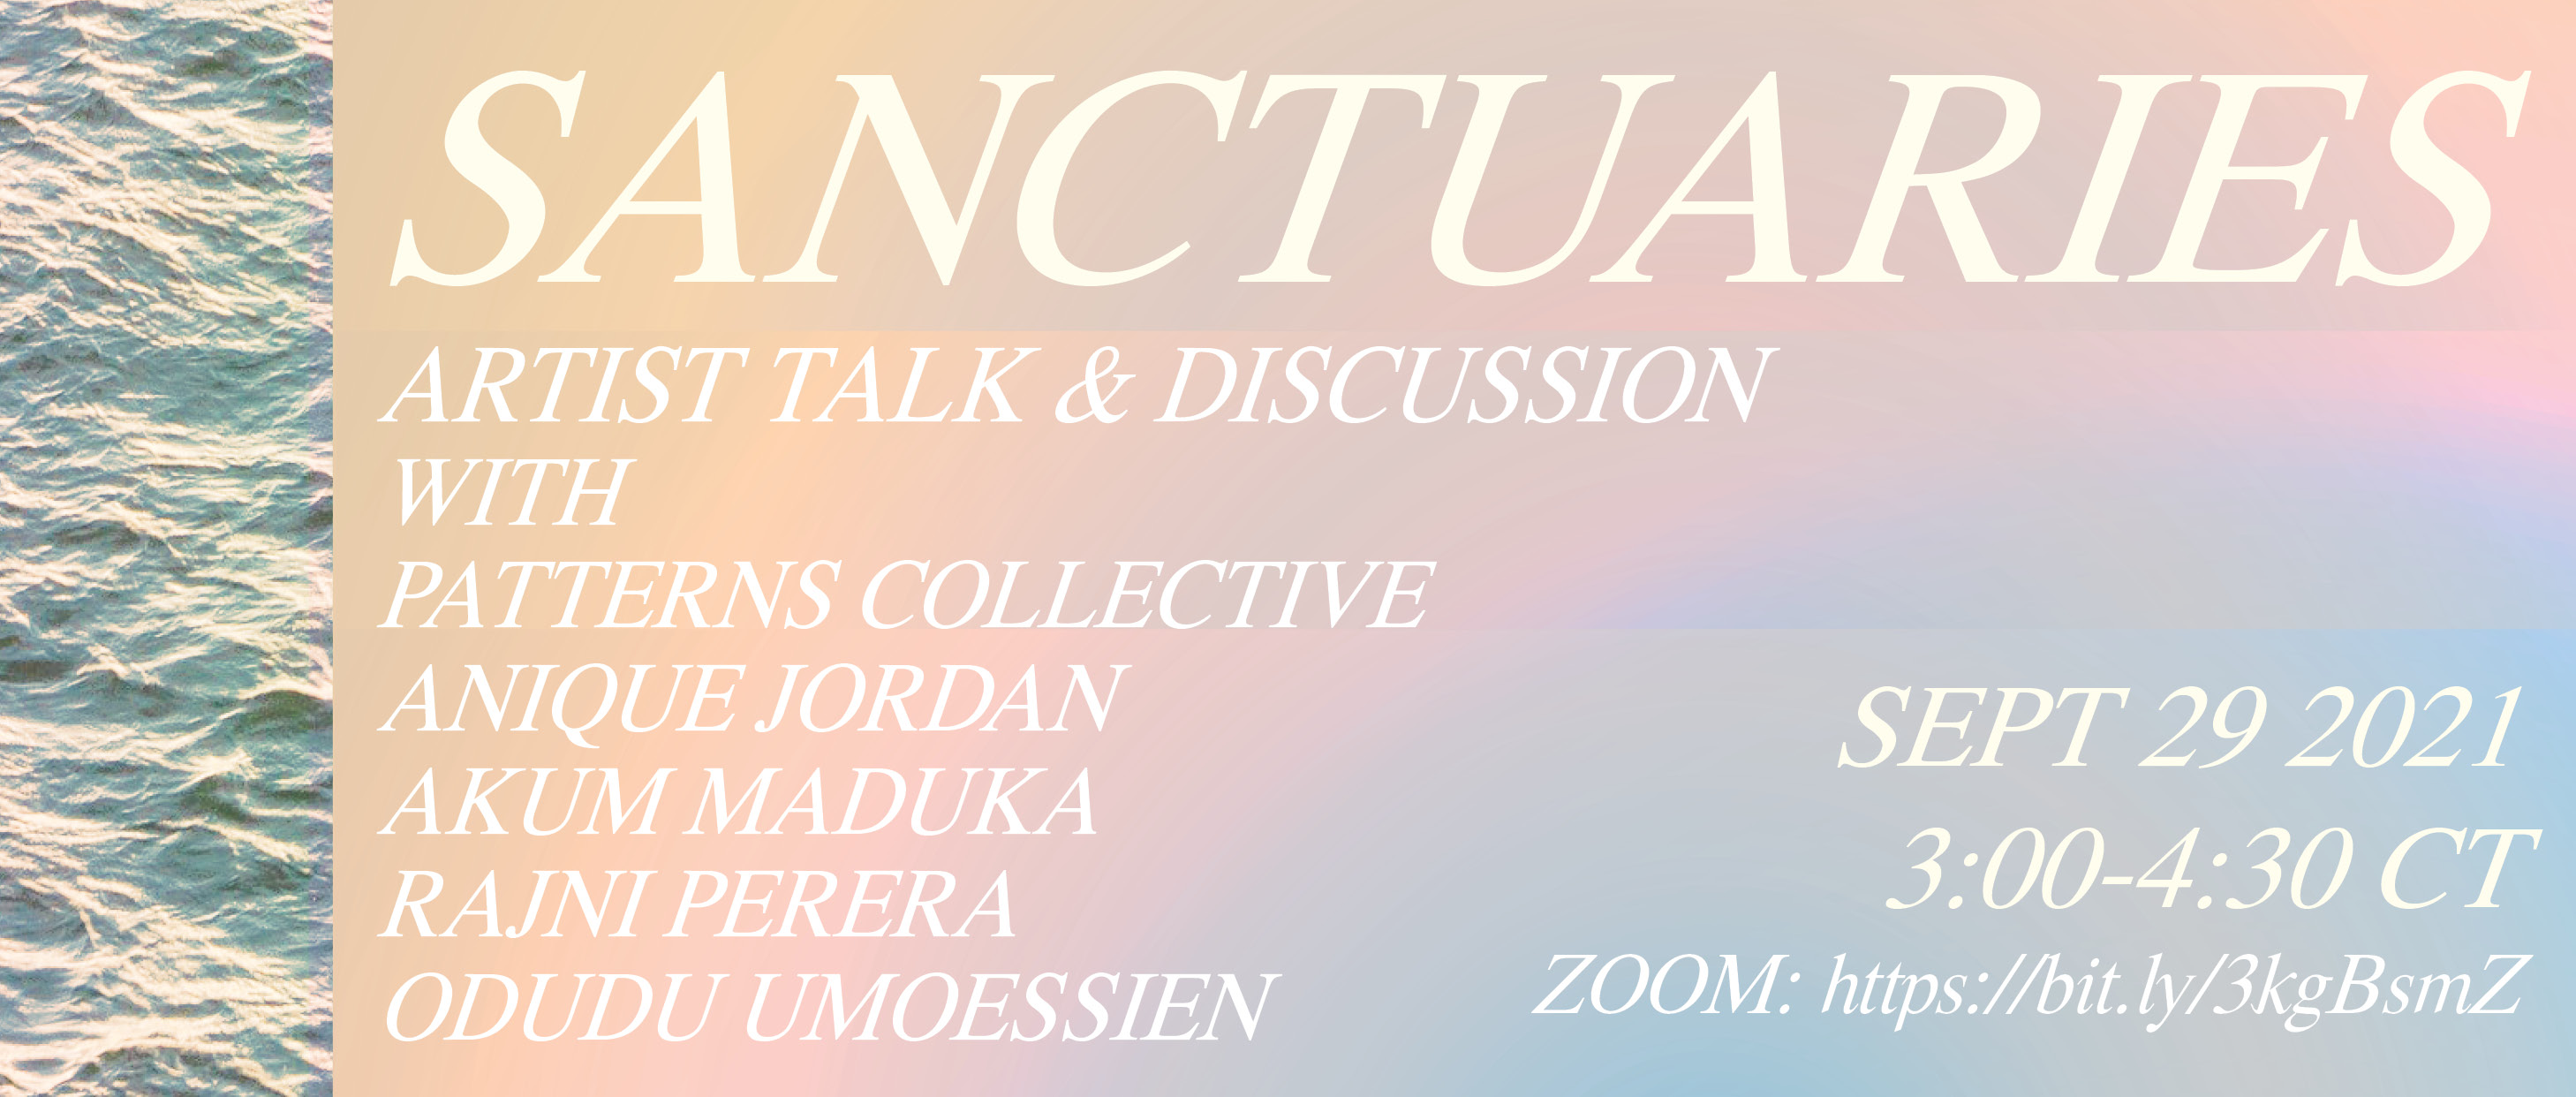 Graphic with peach to pale blue background overlaid with white text that reads "Sanctuaries Artist Talk & Discussion With Patterns Collective Anique Jordan Akum Maduka Rajni Perera Sept 29 2021 3:00 – 4:30 CT ZOOM: https://bit.ly/3kgBsmZ”." A photograph of water is along the left edge of the graphic.